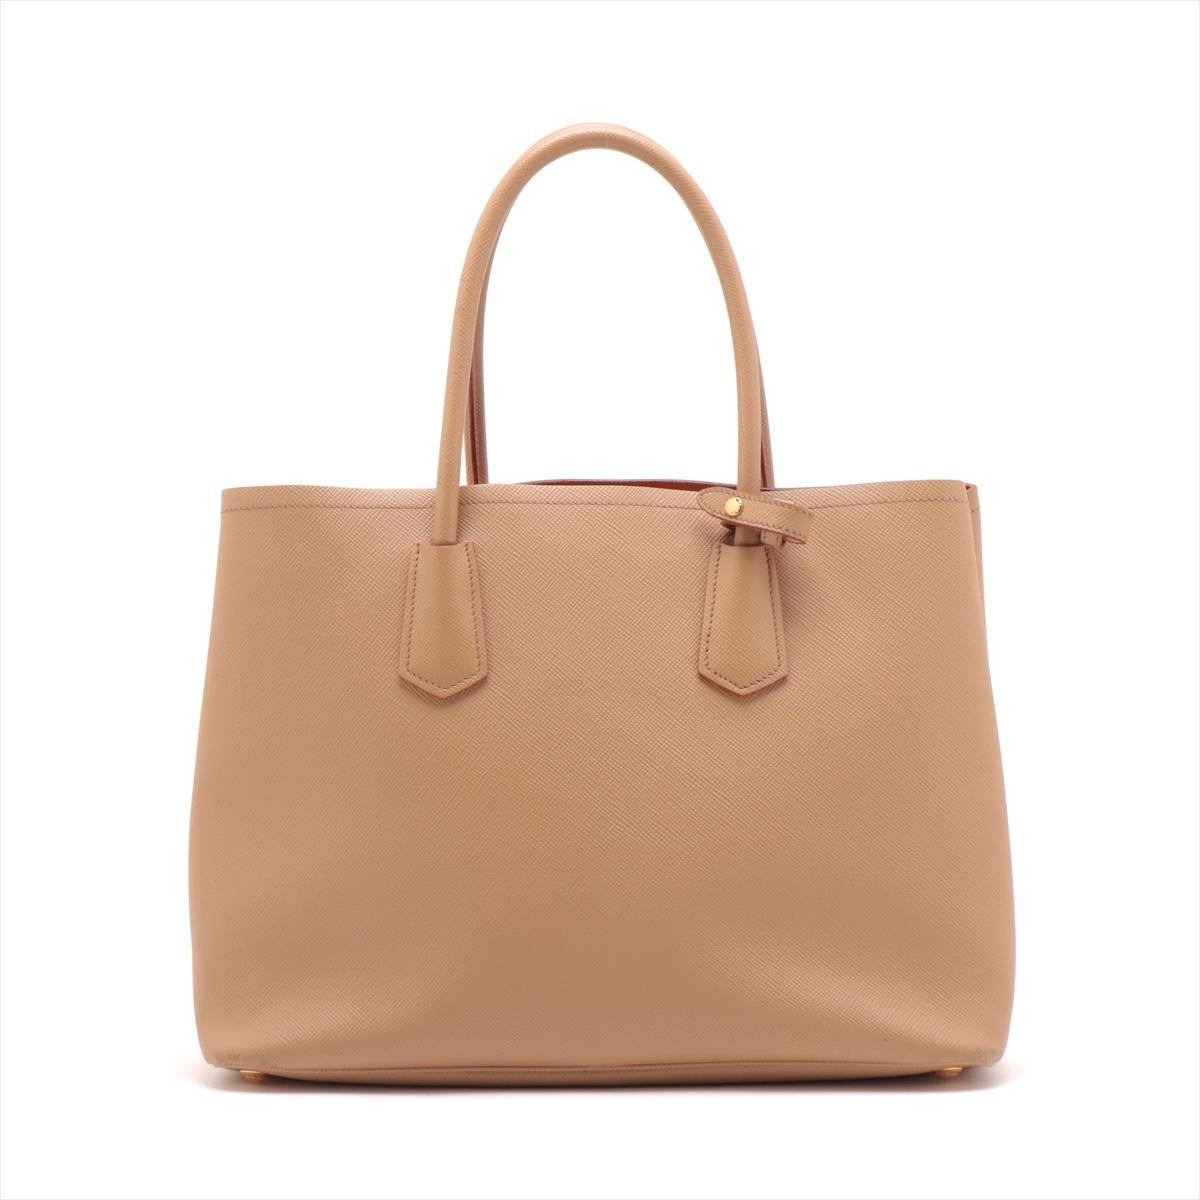 Prada Saffiano Cuir Two - Way Tote Bag Beige In Good Condition For Sale In Indianapolis, IN